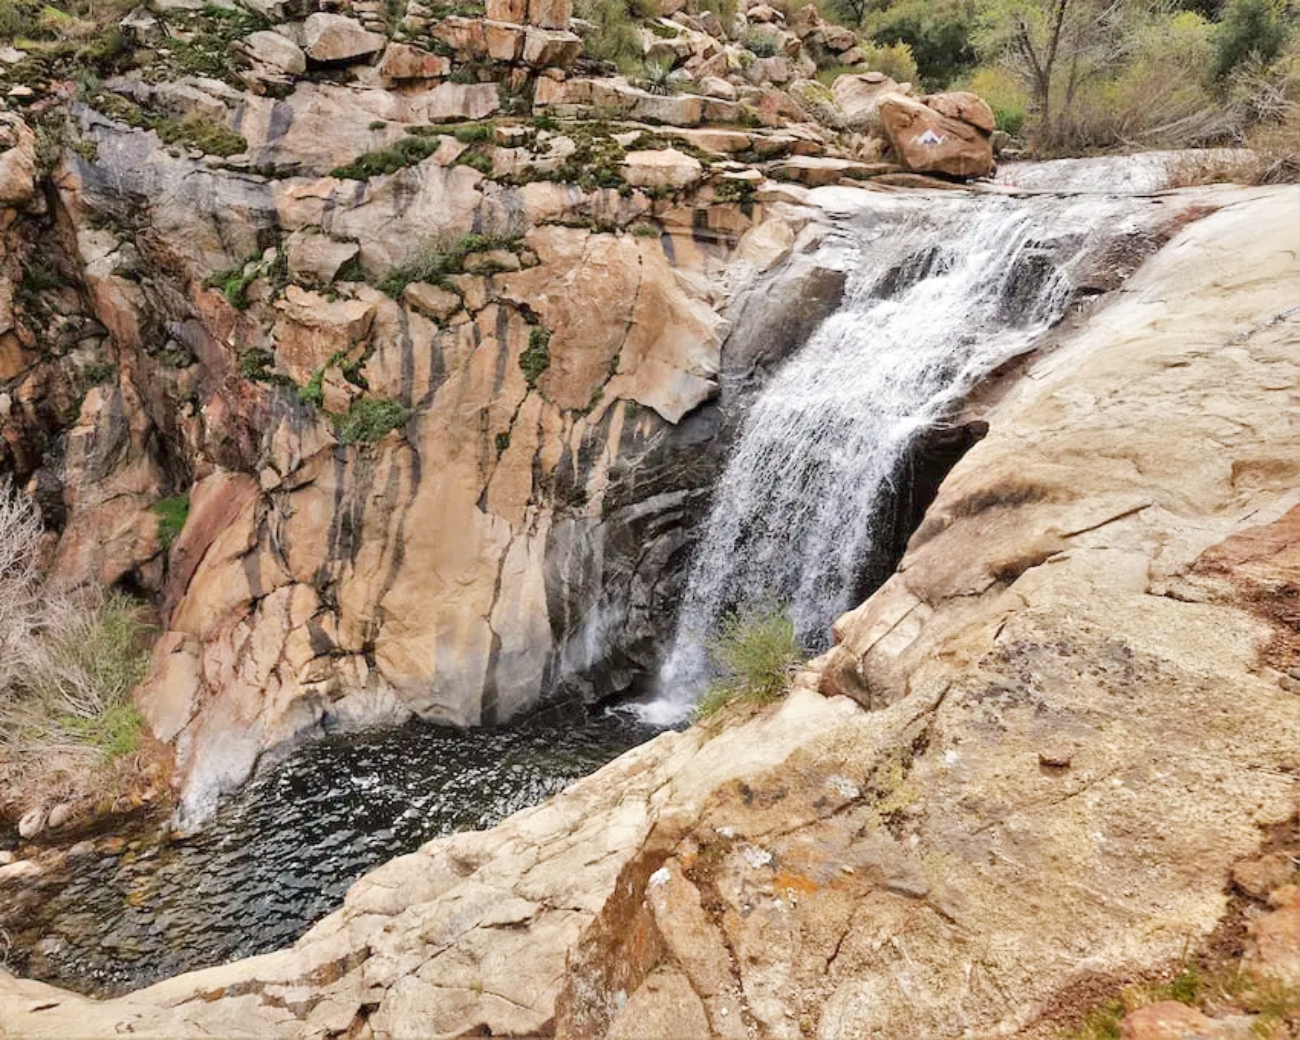 A California woman fell to her death on Thursday after she lost her footing while reaching out to help a teen who had slipped on the ledge of a waterfall, authorities said.